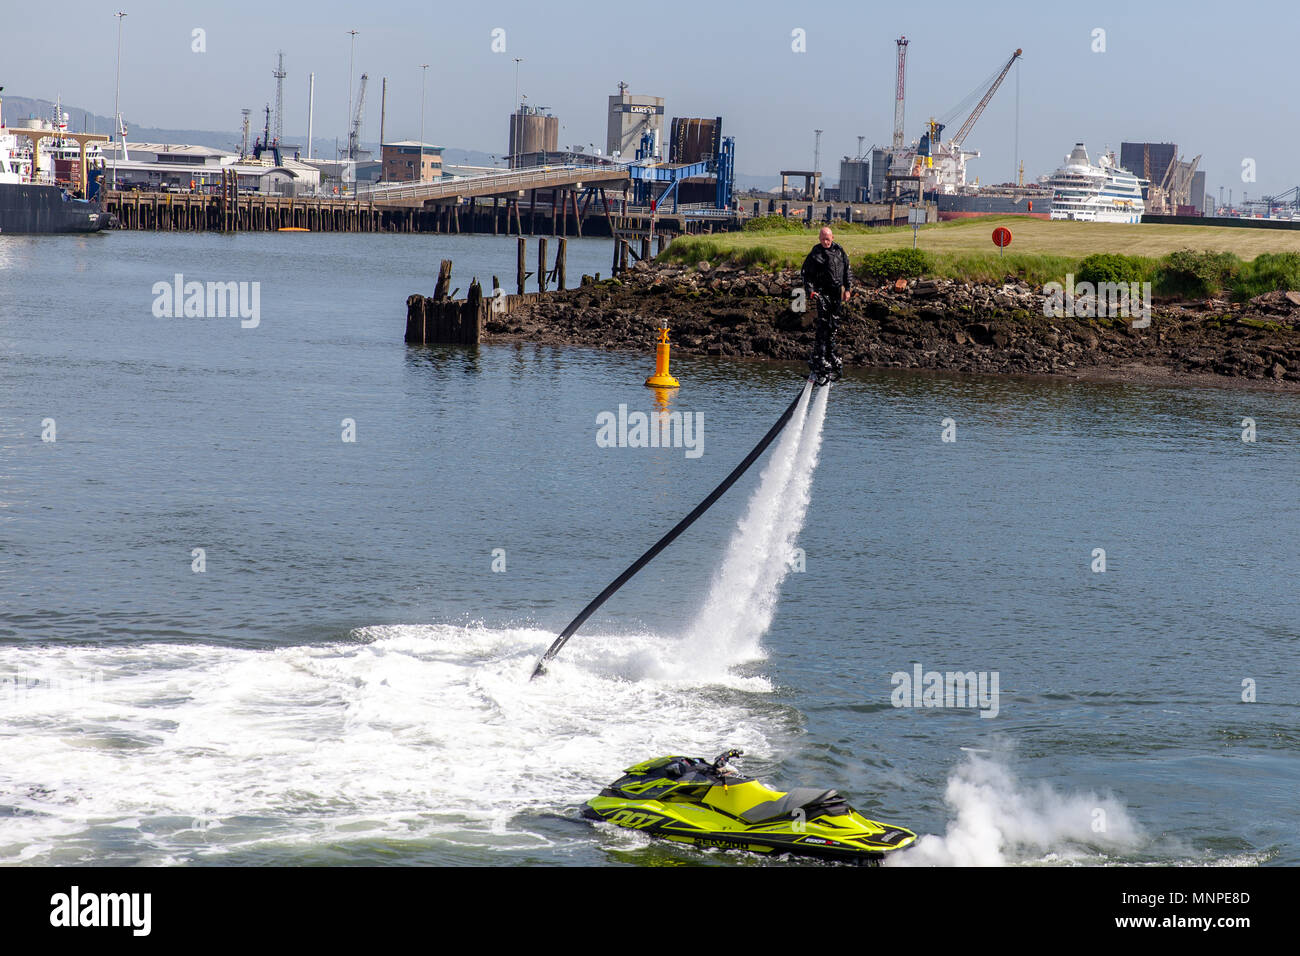 Queen's Quay, Northern Ireland.19th May 2018. As part of the Belfast Maritime Festival there was flyboard jet ski display.  Photo: Sean Harkin/Alamy Live News sales@alamy.com Stock Photo